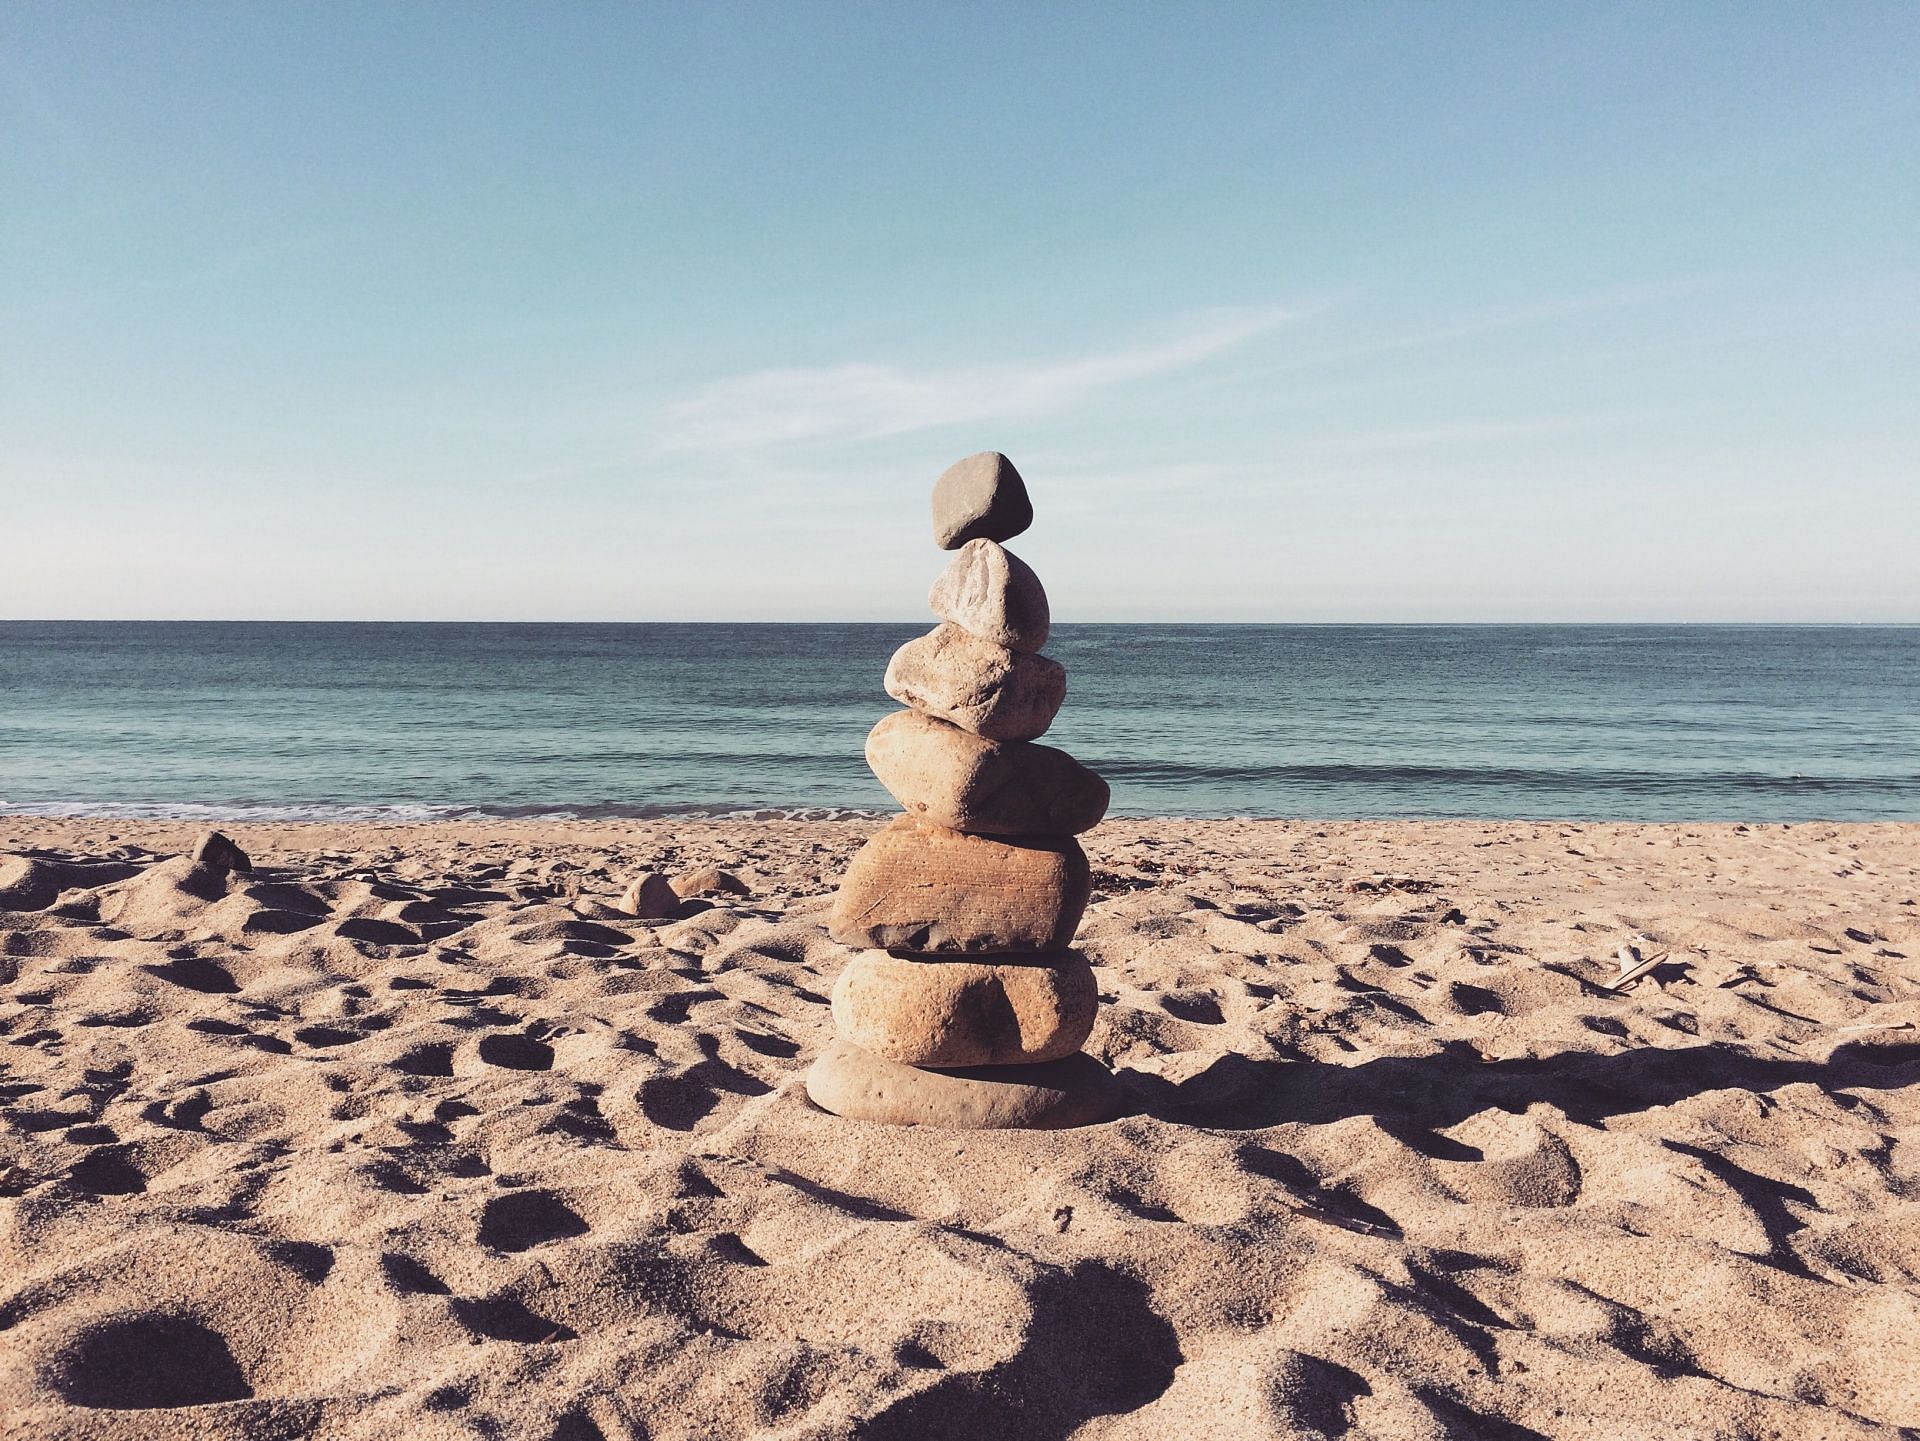 Calm Mind: Breathing exercises relieves stress and anxiety. (Image via Unsplash/Calder B)